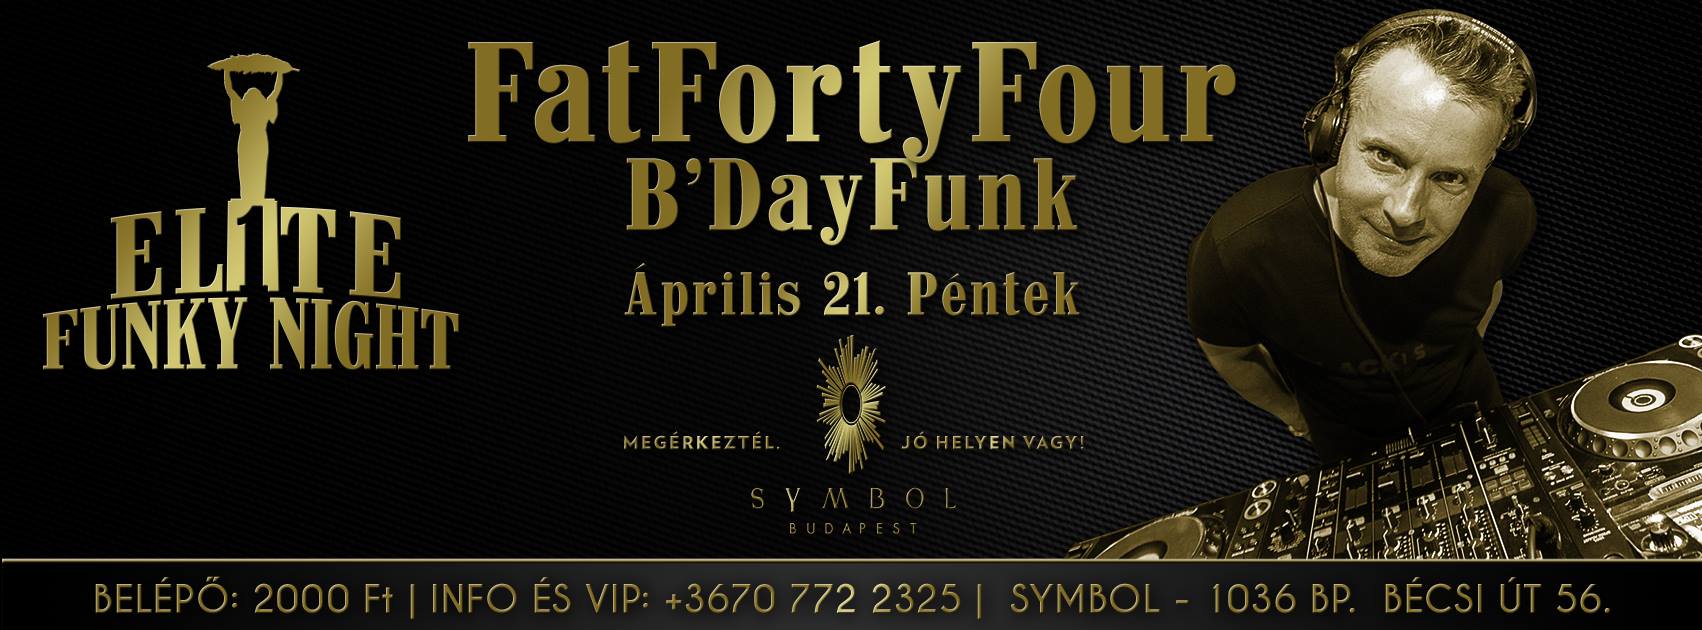 Fat Forty Four B'Day Funk